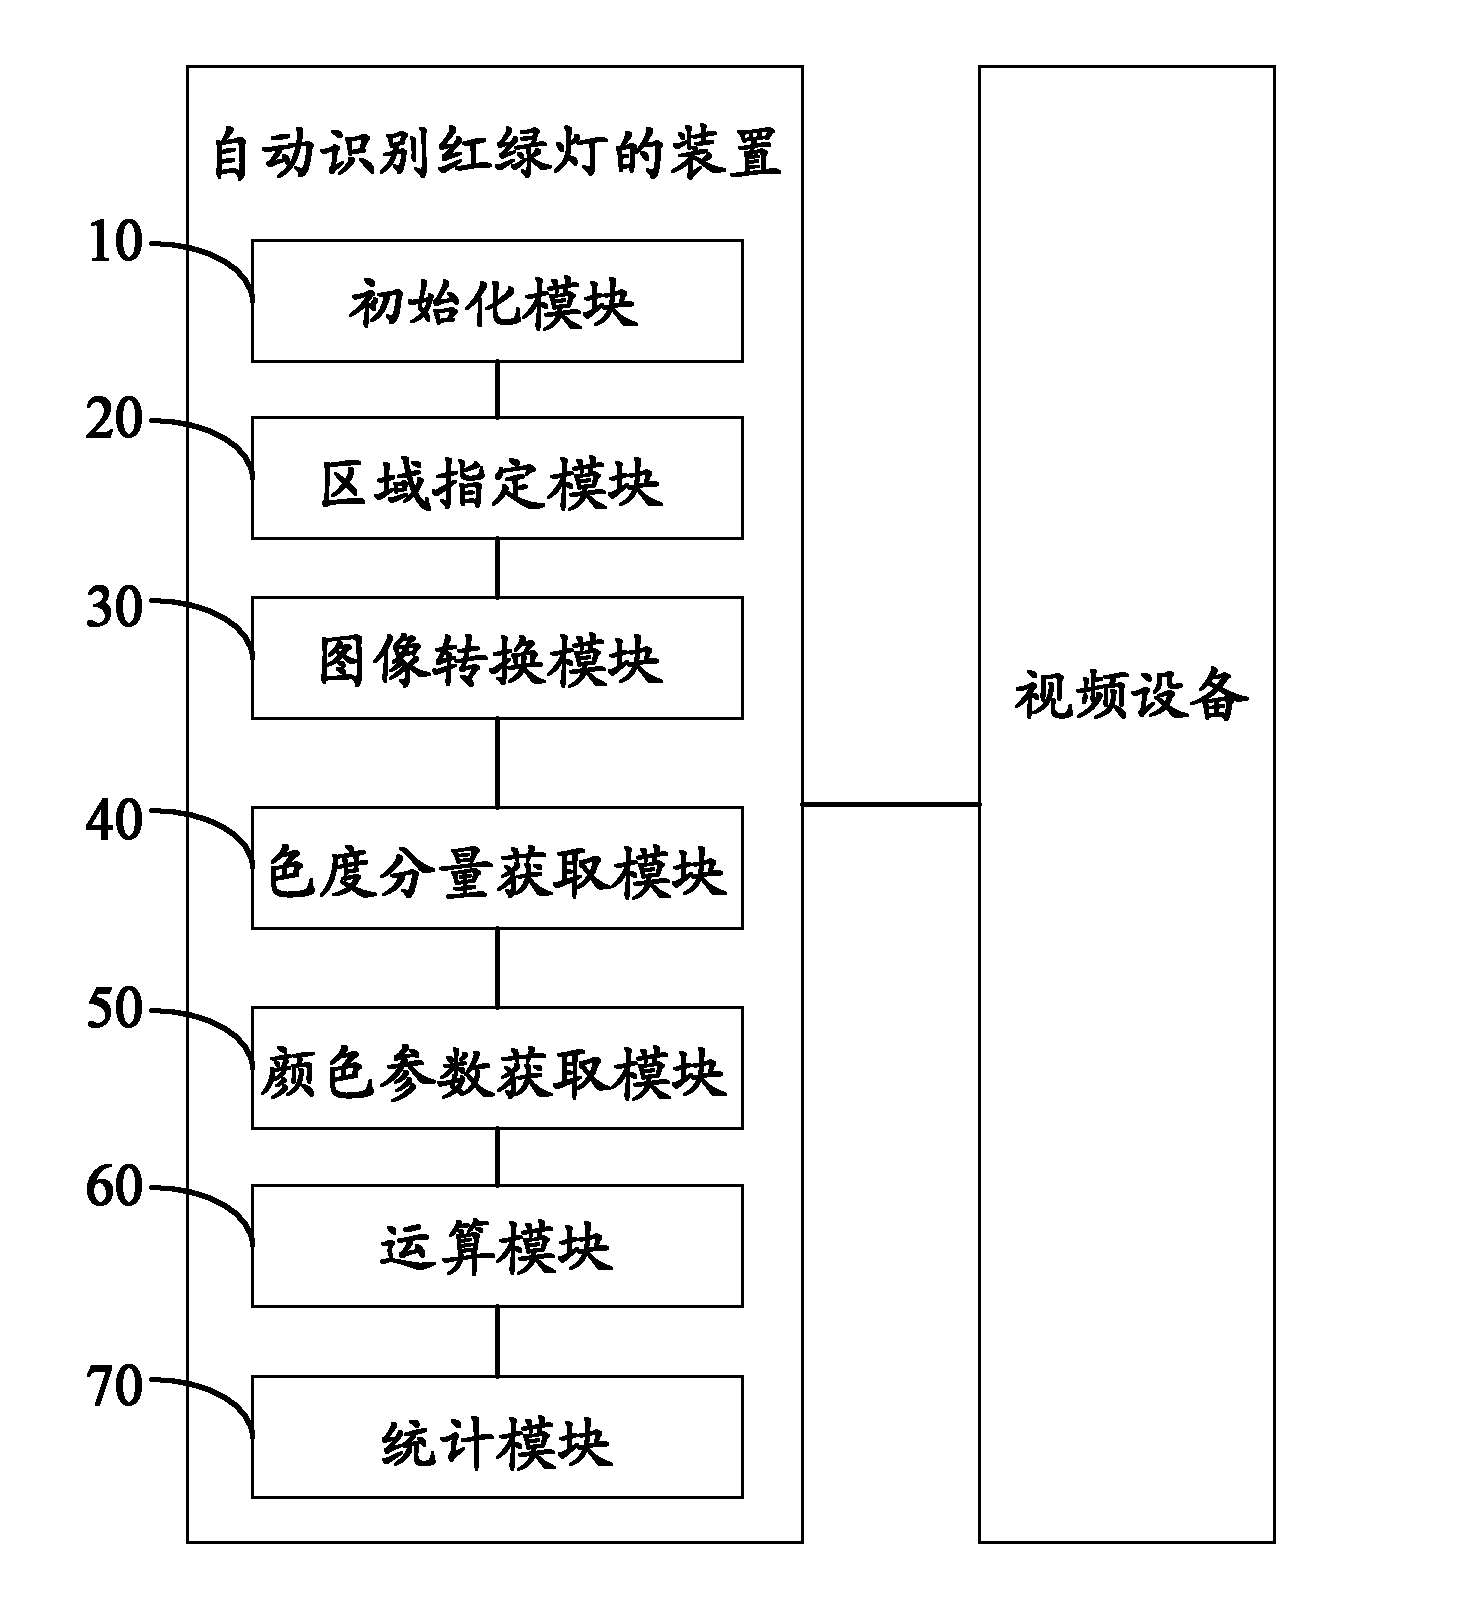 Method and apparatus for automatic identification of traffic lights